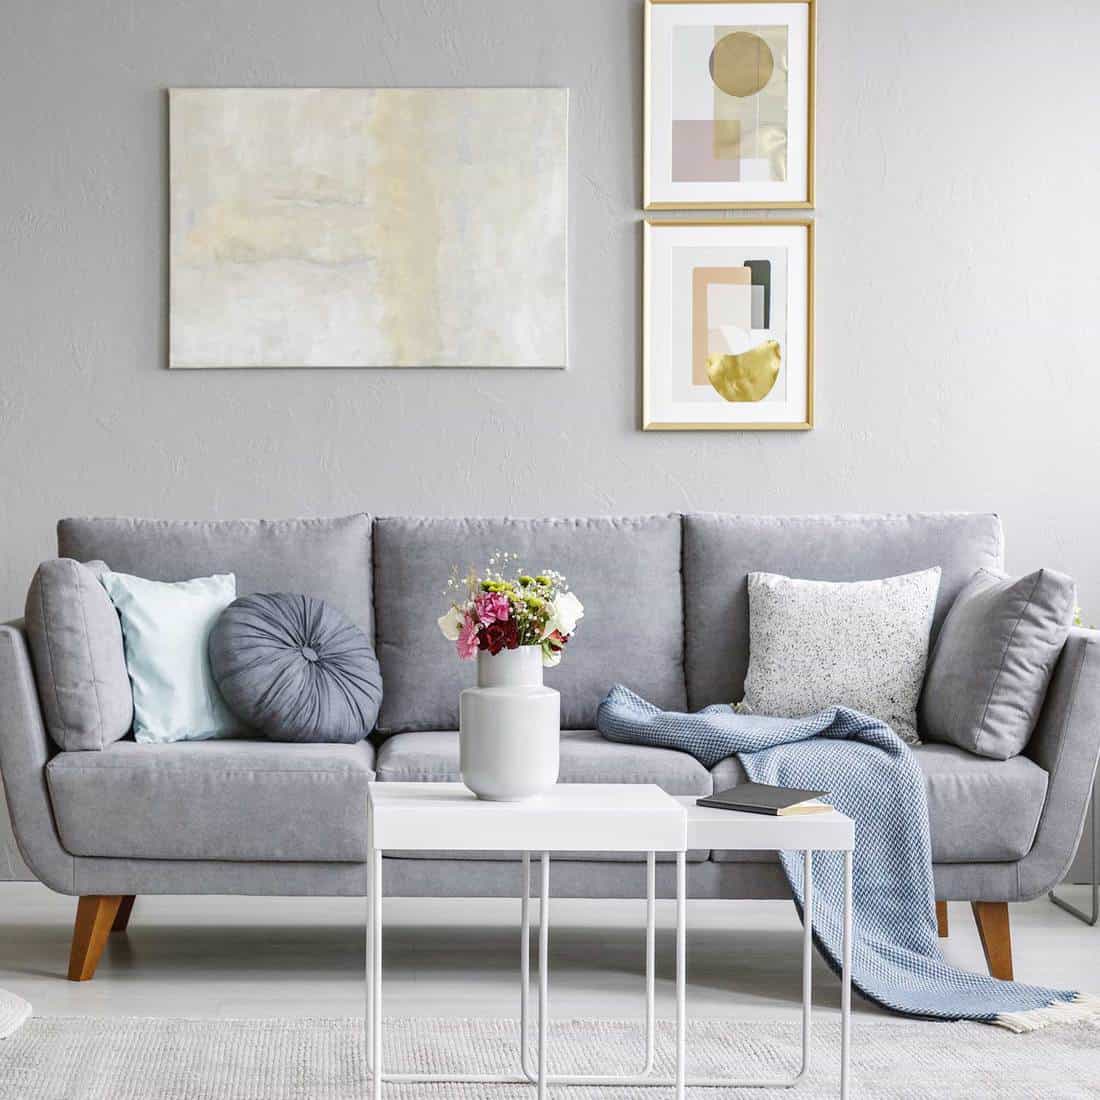 Living Room Interior With Grey Sofa And Flowers On Table 